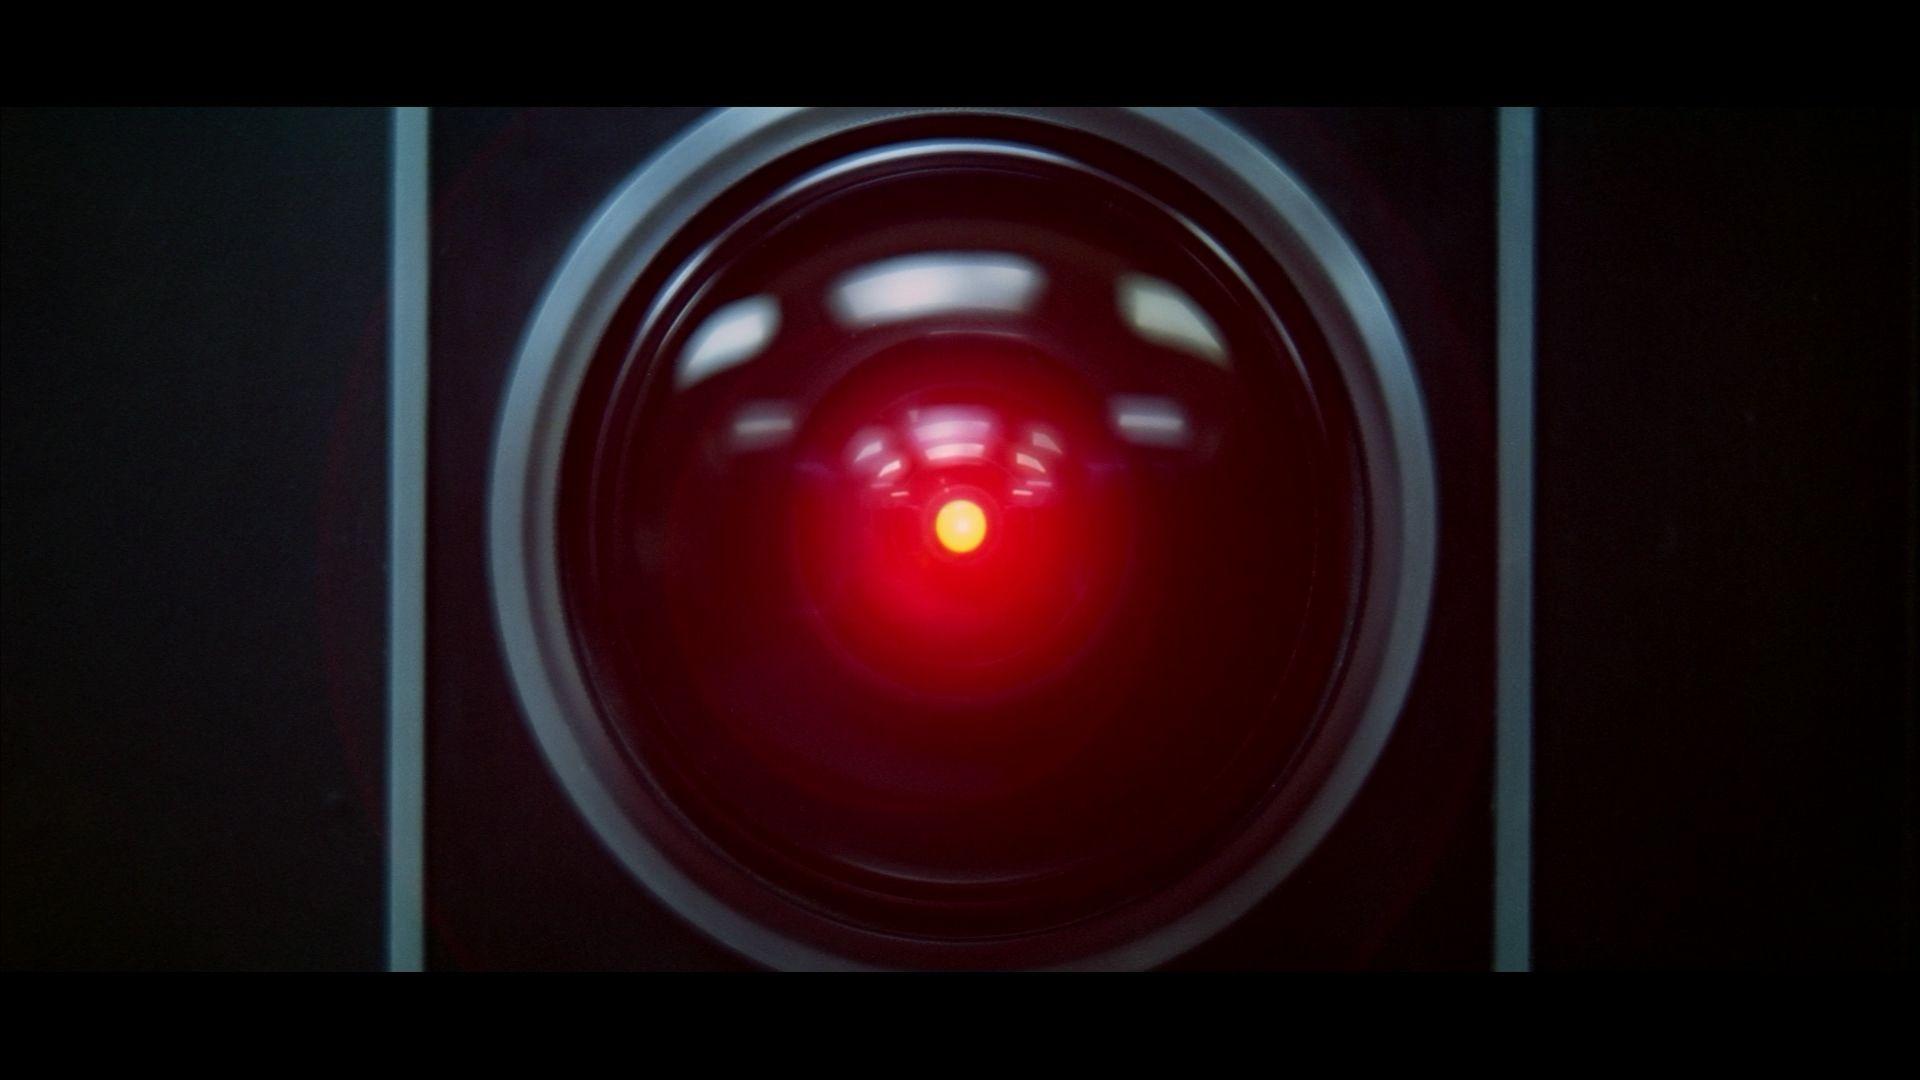 a space odyssey hal9000 1920x1080 wallpaper High Quality